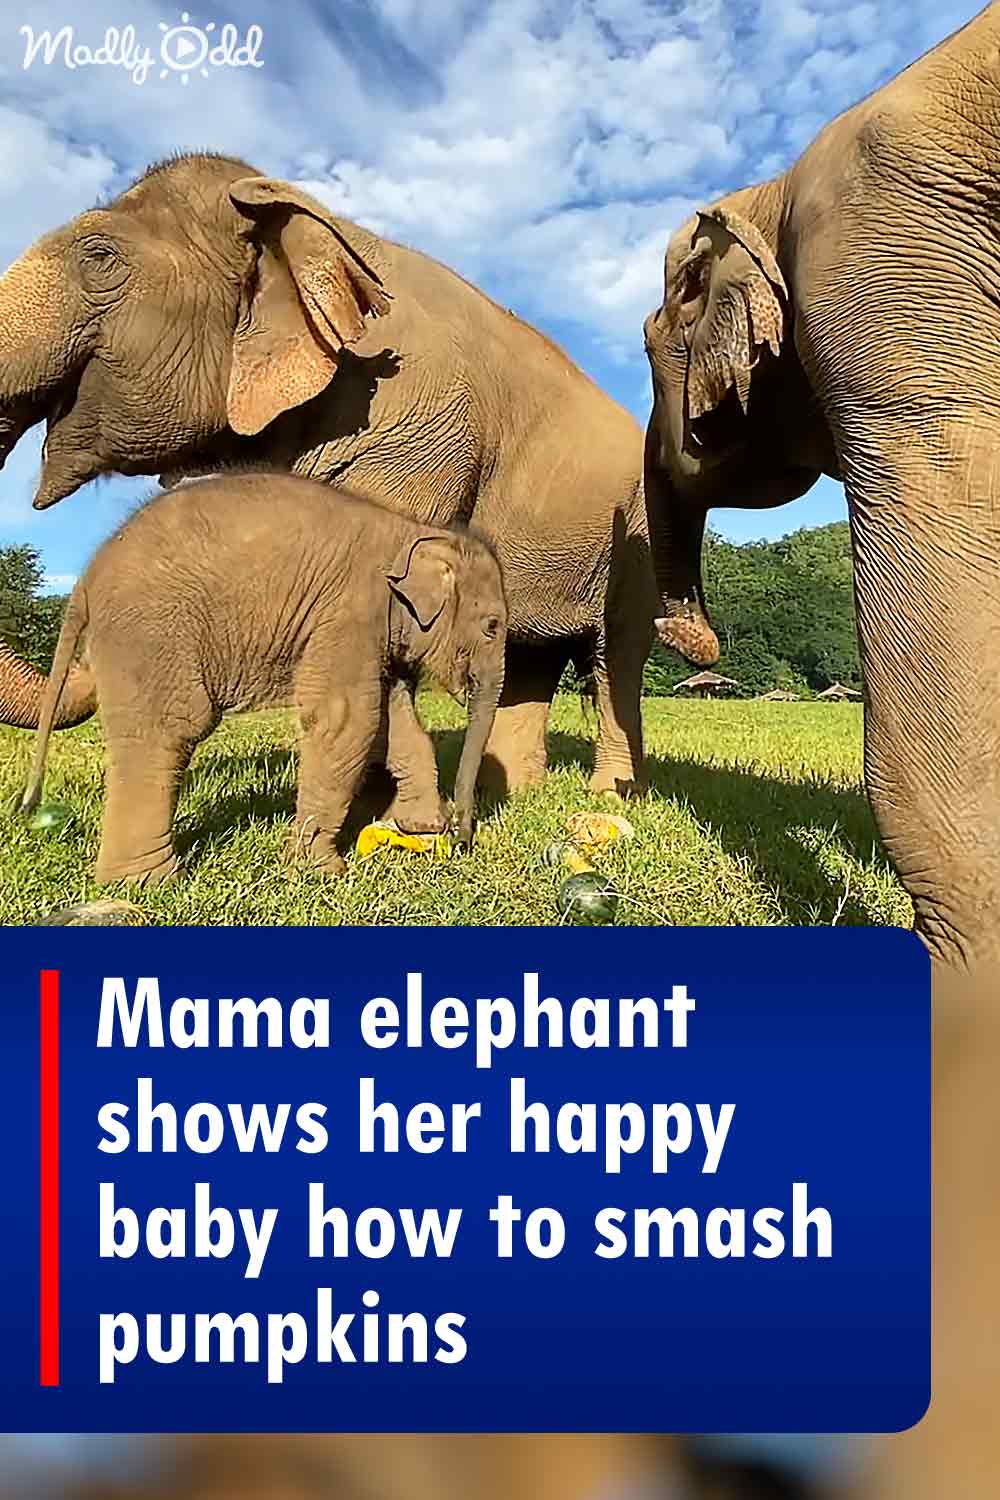 Mama elephant shows her happy baby how to smash pumpkins